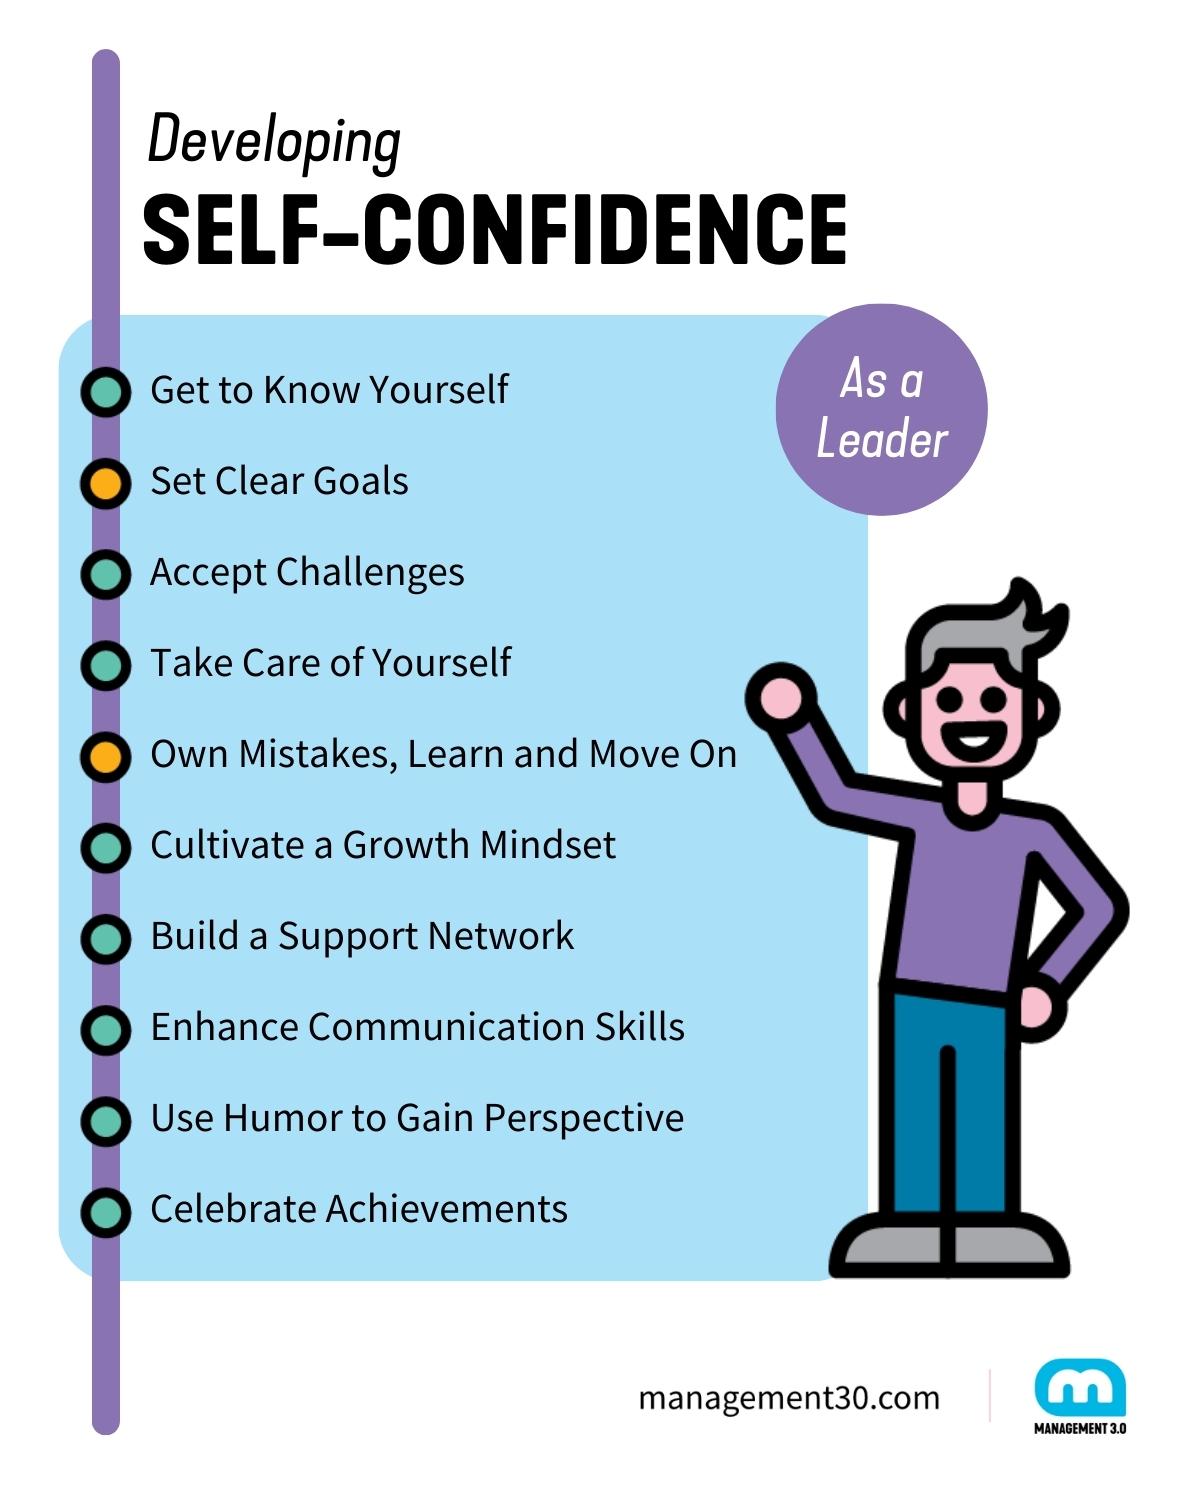 Developing Self-Confidence as a Leader